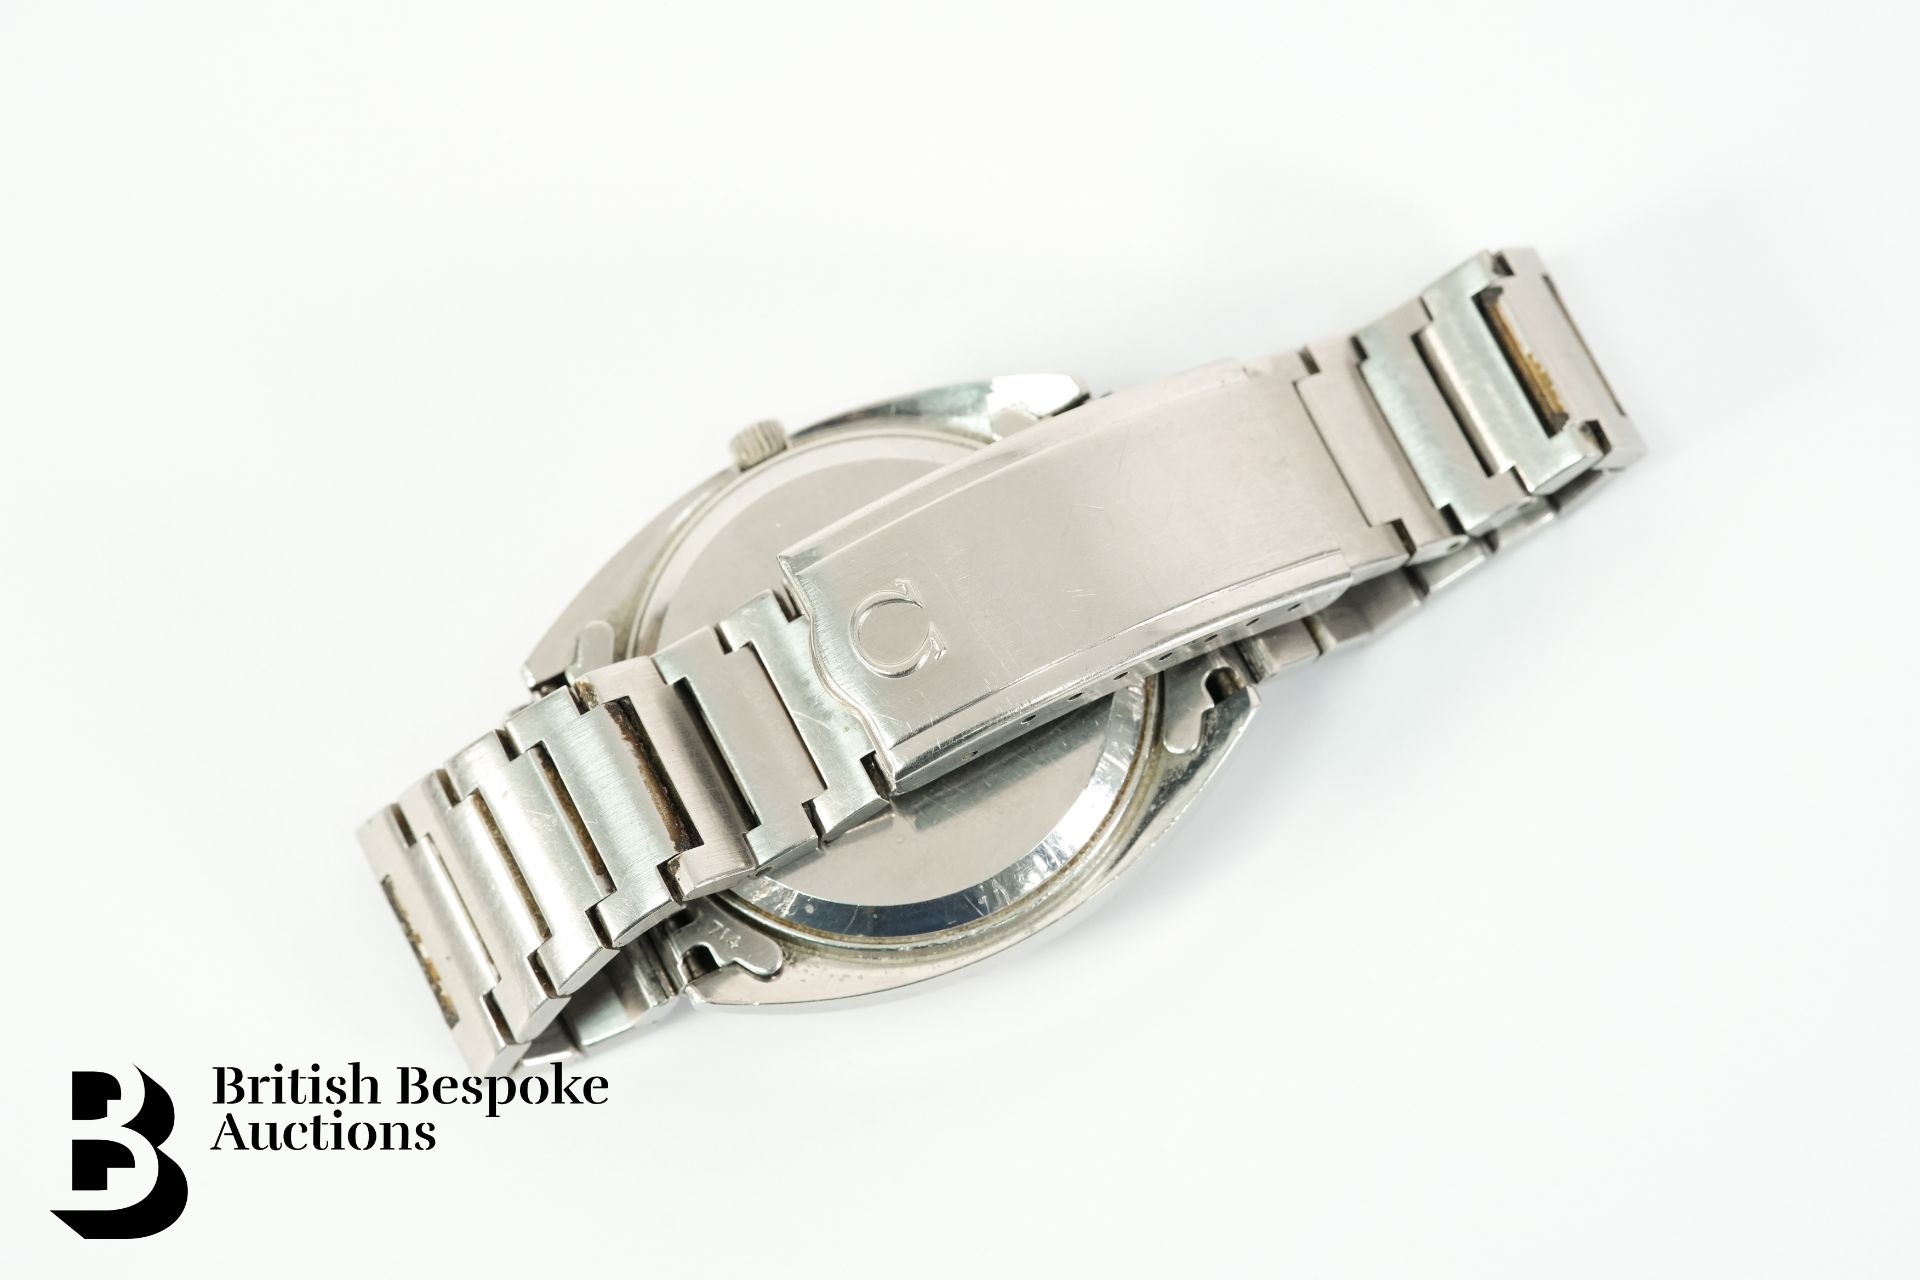 Stainless Steel Omega Wrist Watch - Image 3 of 4